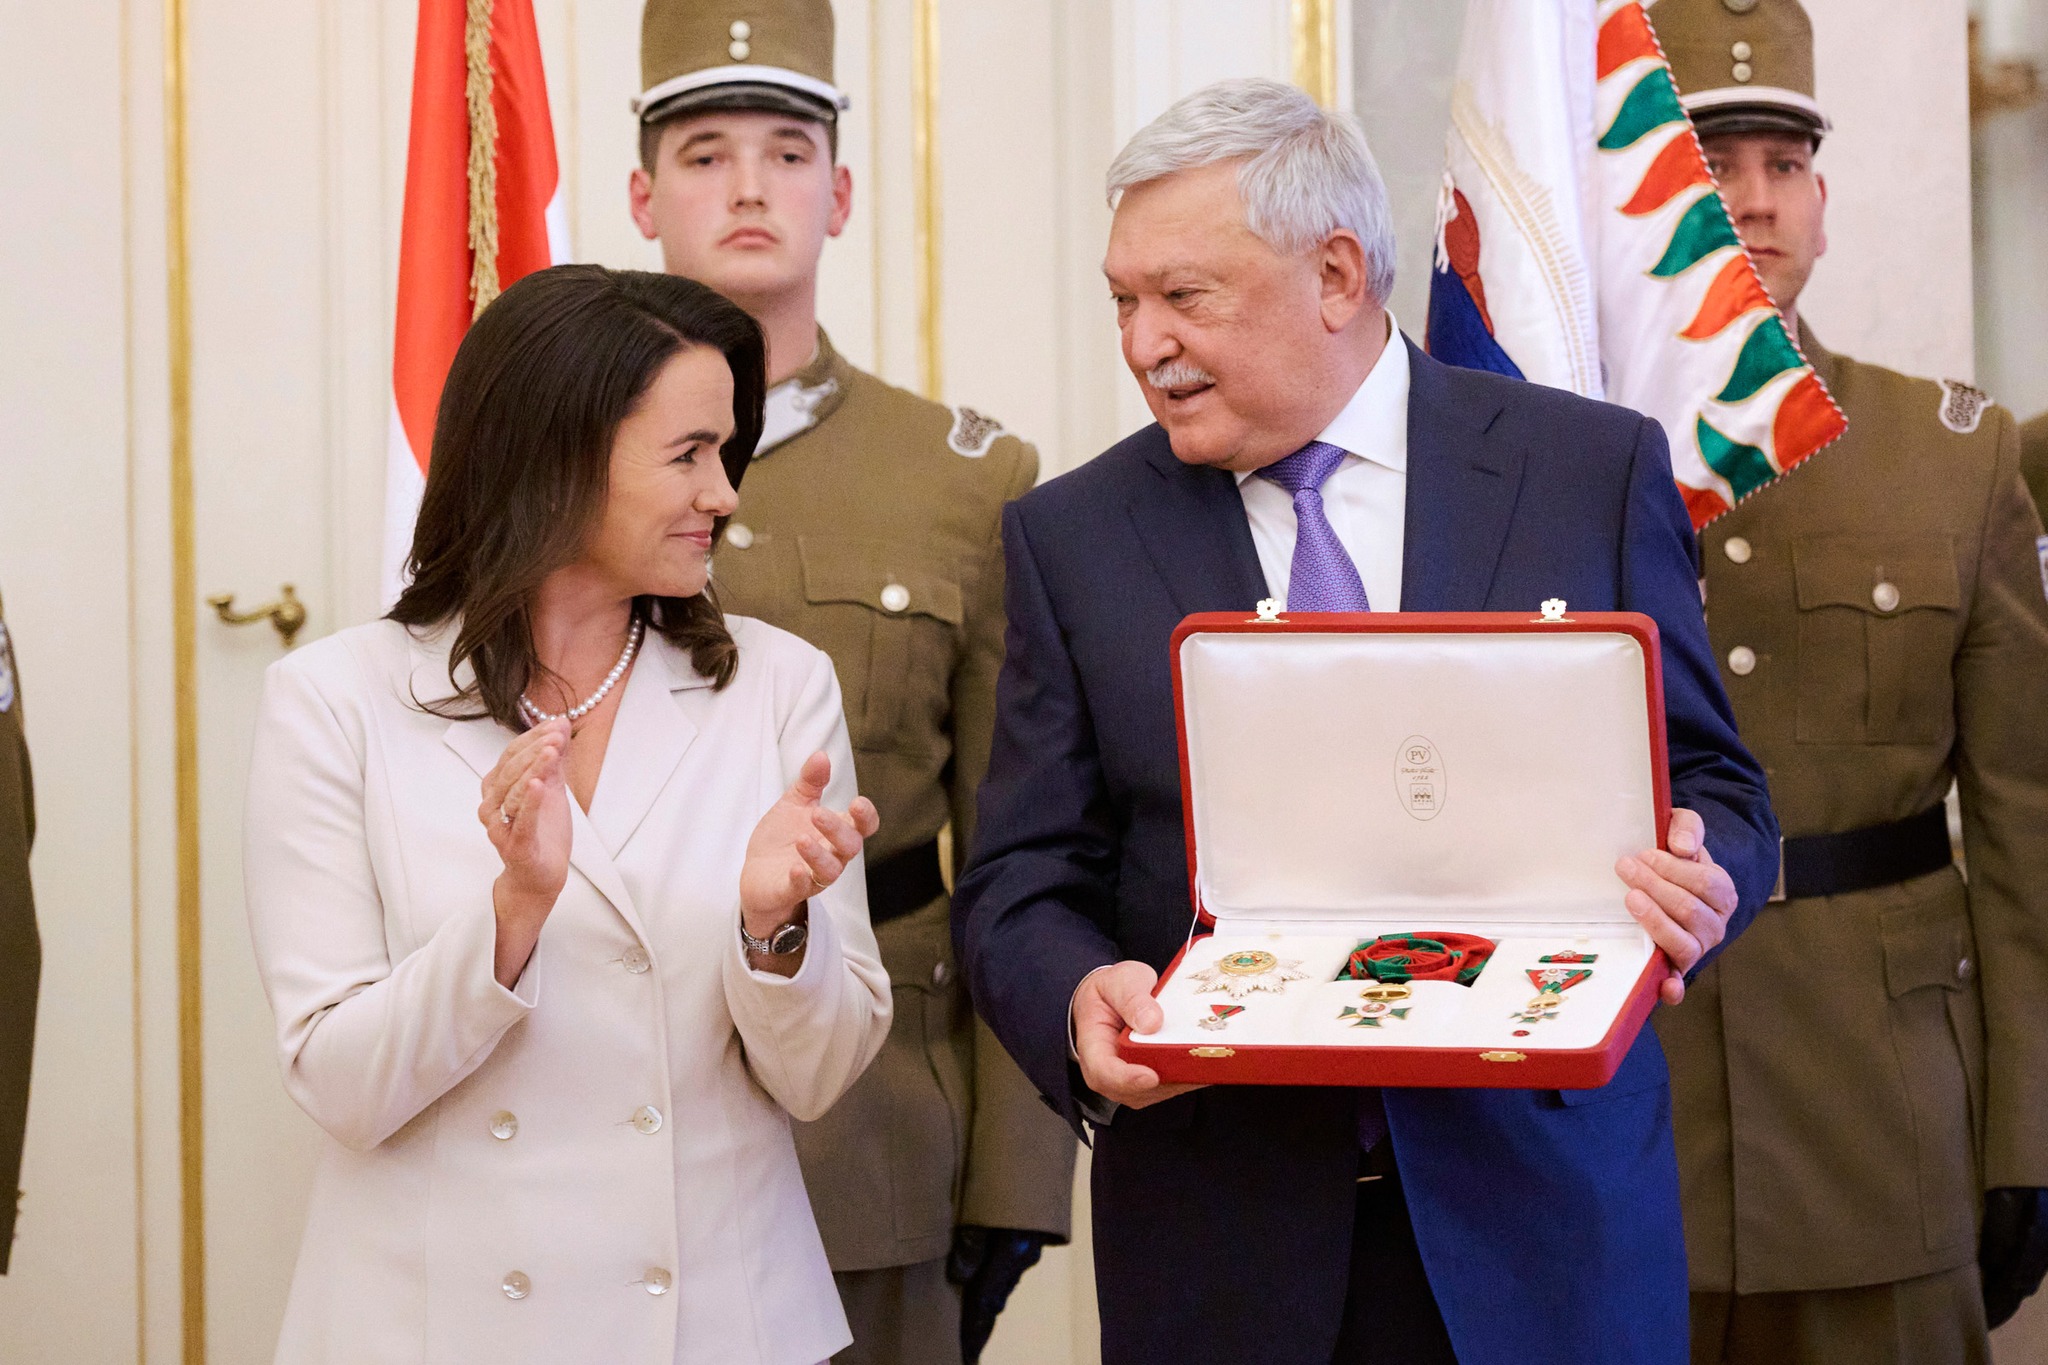 Highest Honor: Billionaire Banker Csányi Decorated with Hungarian Order of St Stephen by President Novák